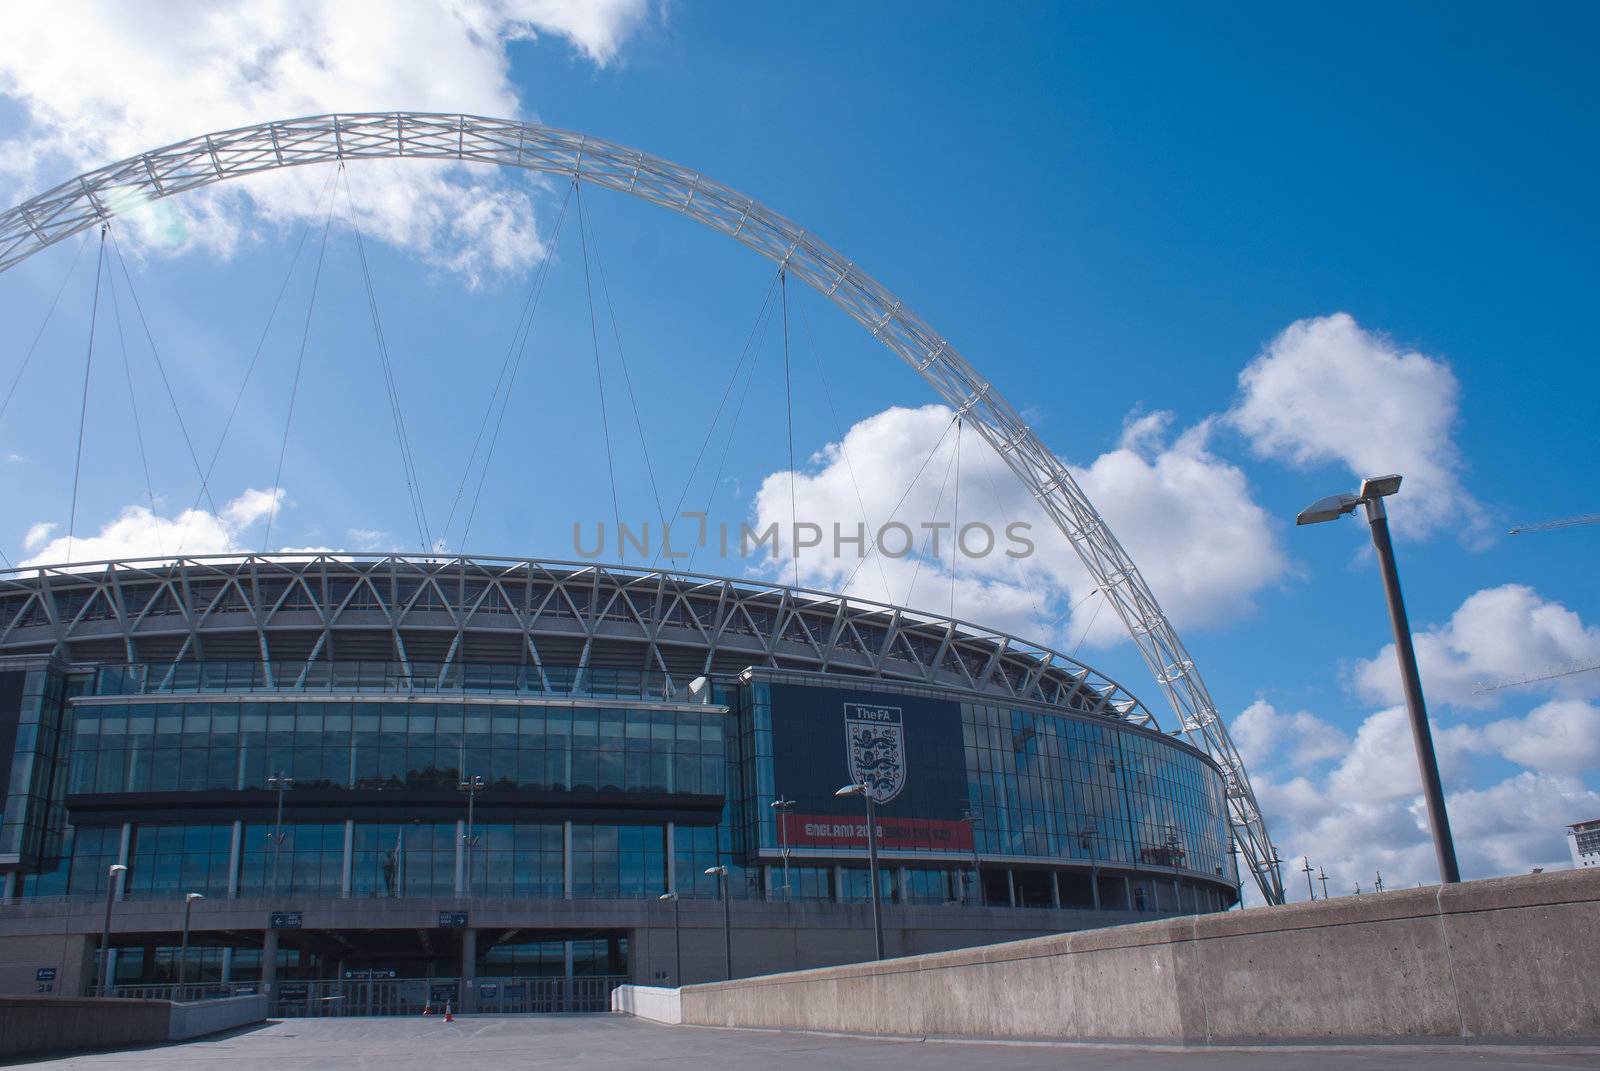 Wembley stadium panorama by AndreyKr